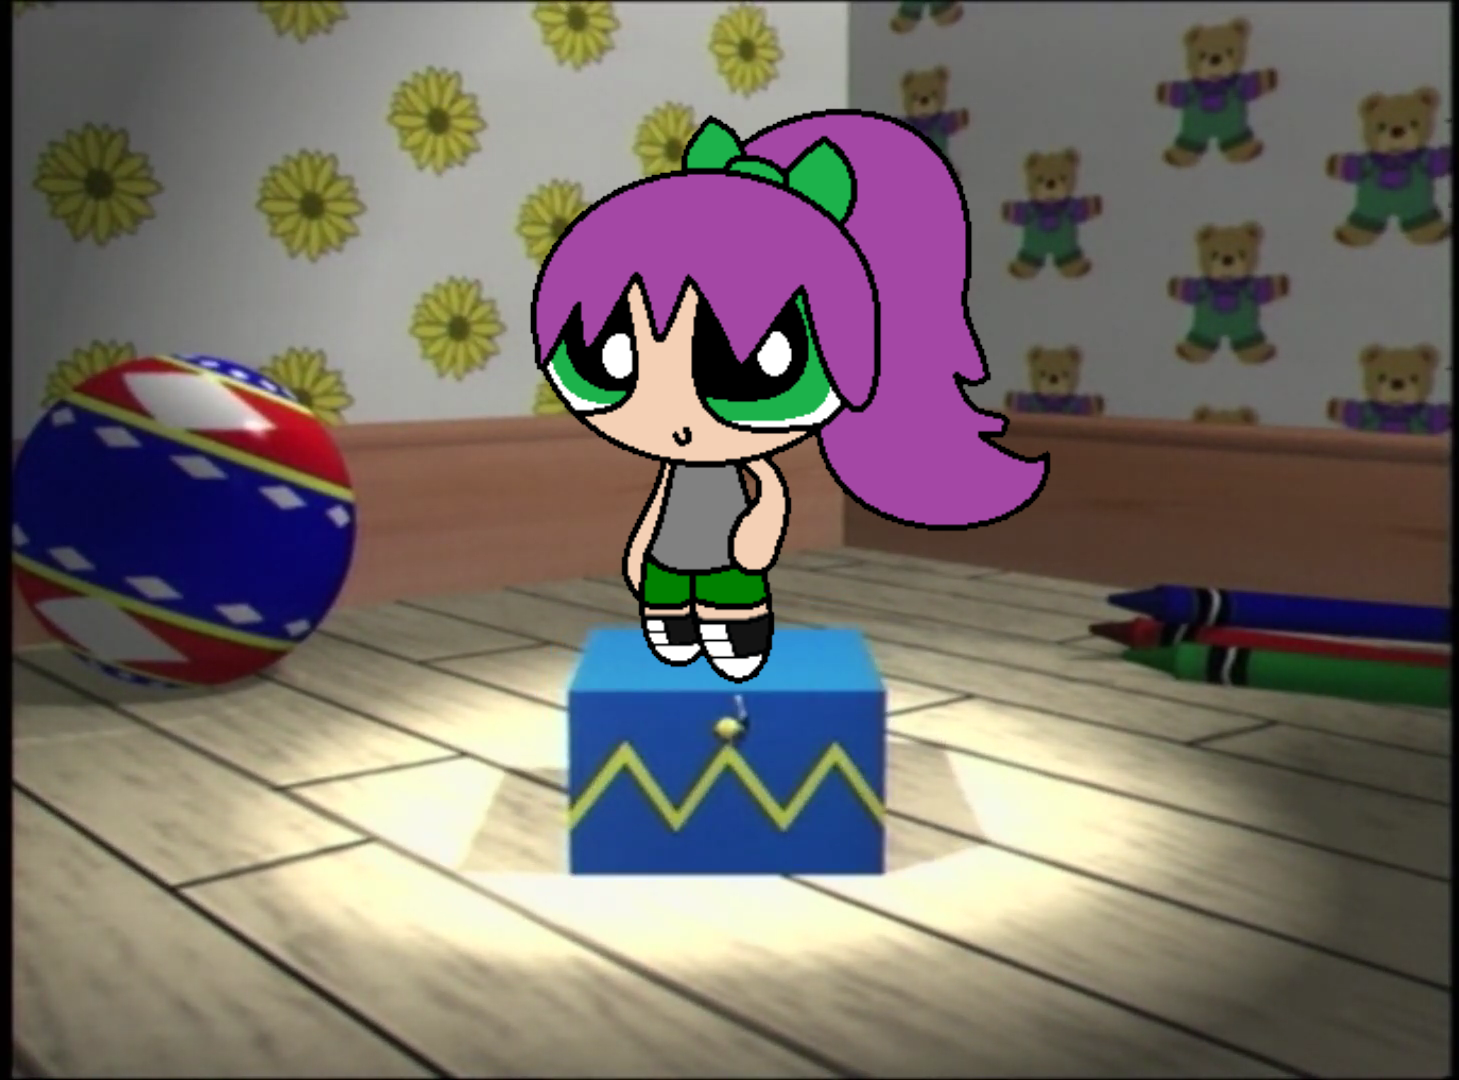 High Quality Paige standing on the Box in the Tempo Pre-School logo Blank Meme Template